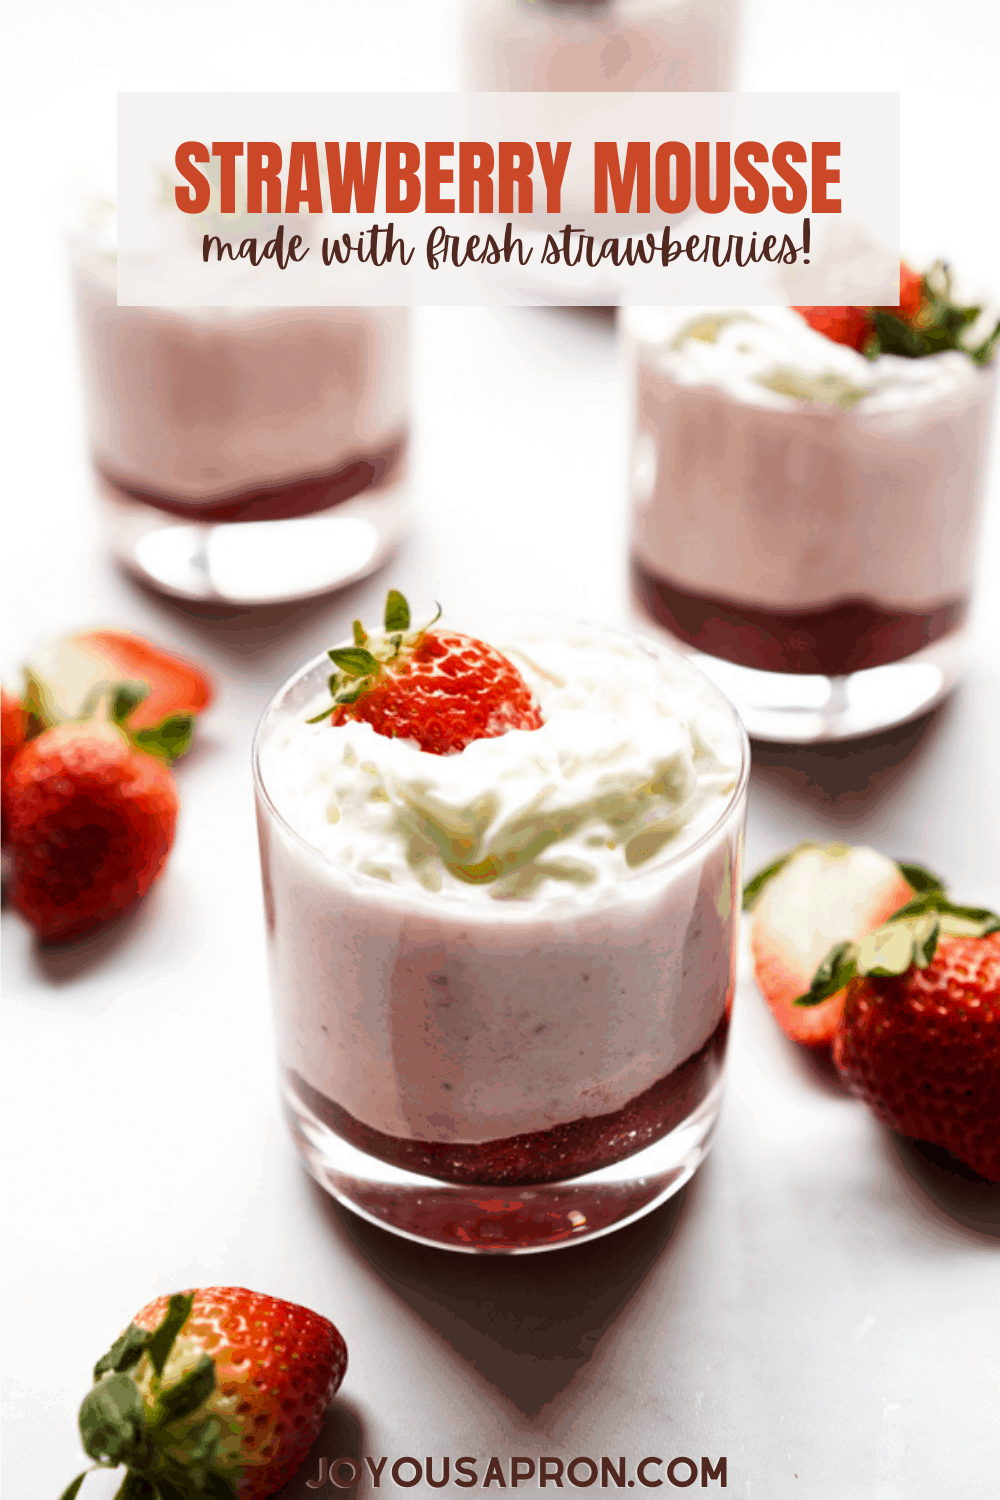 Strawberry Mousse - no-cook strawberry mousse dessert recipe made with real strawberries! Layered with strawberry preserve, whipped cream and strawberries. Easy to make and so delicious. via @joyousapron